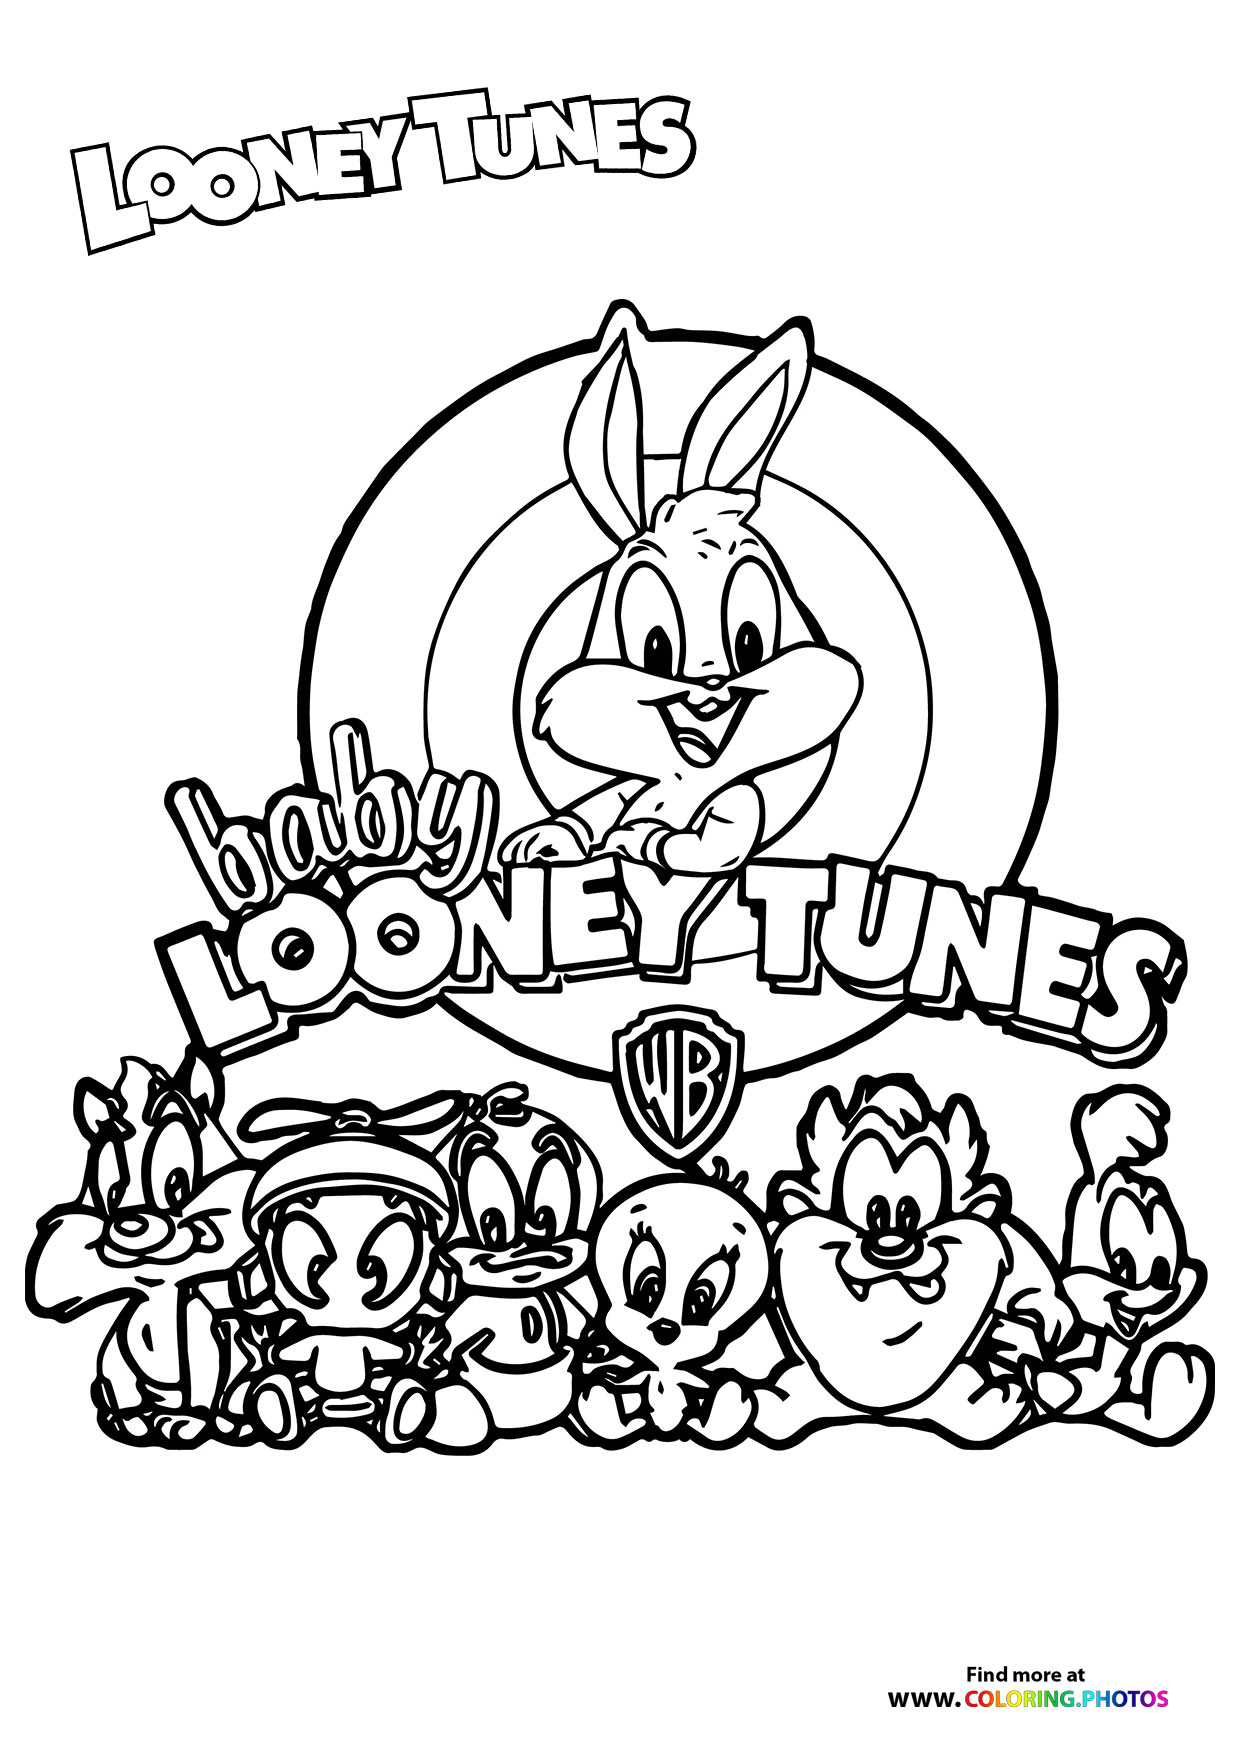 Looney tunes pages free print or download images for your kids